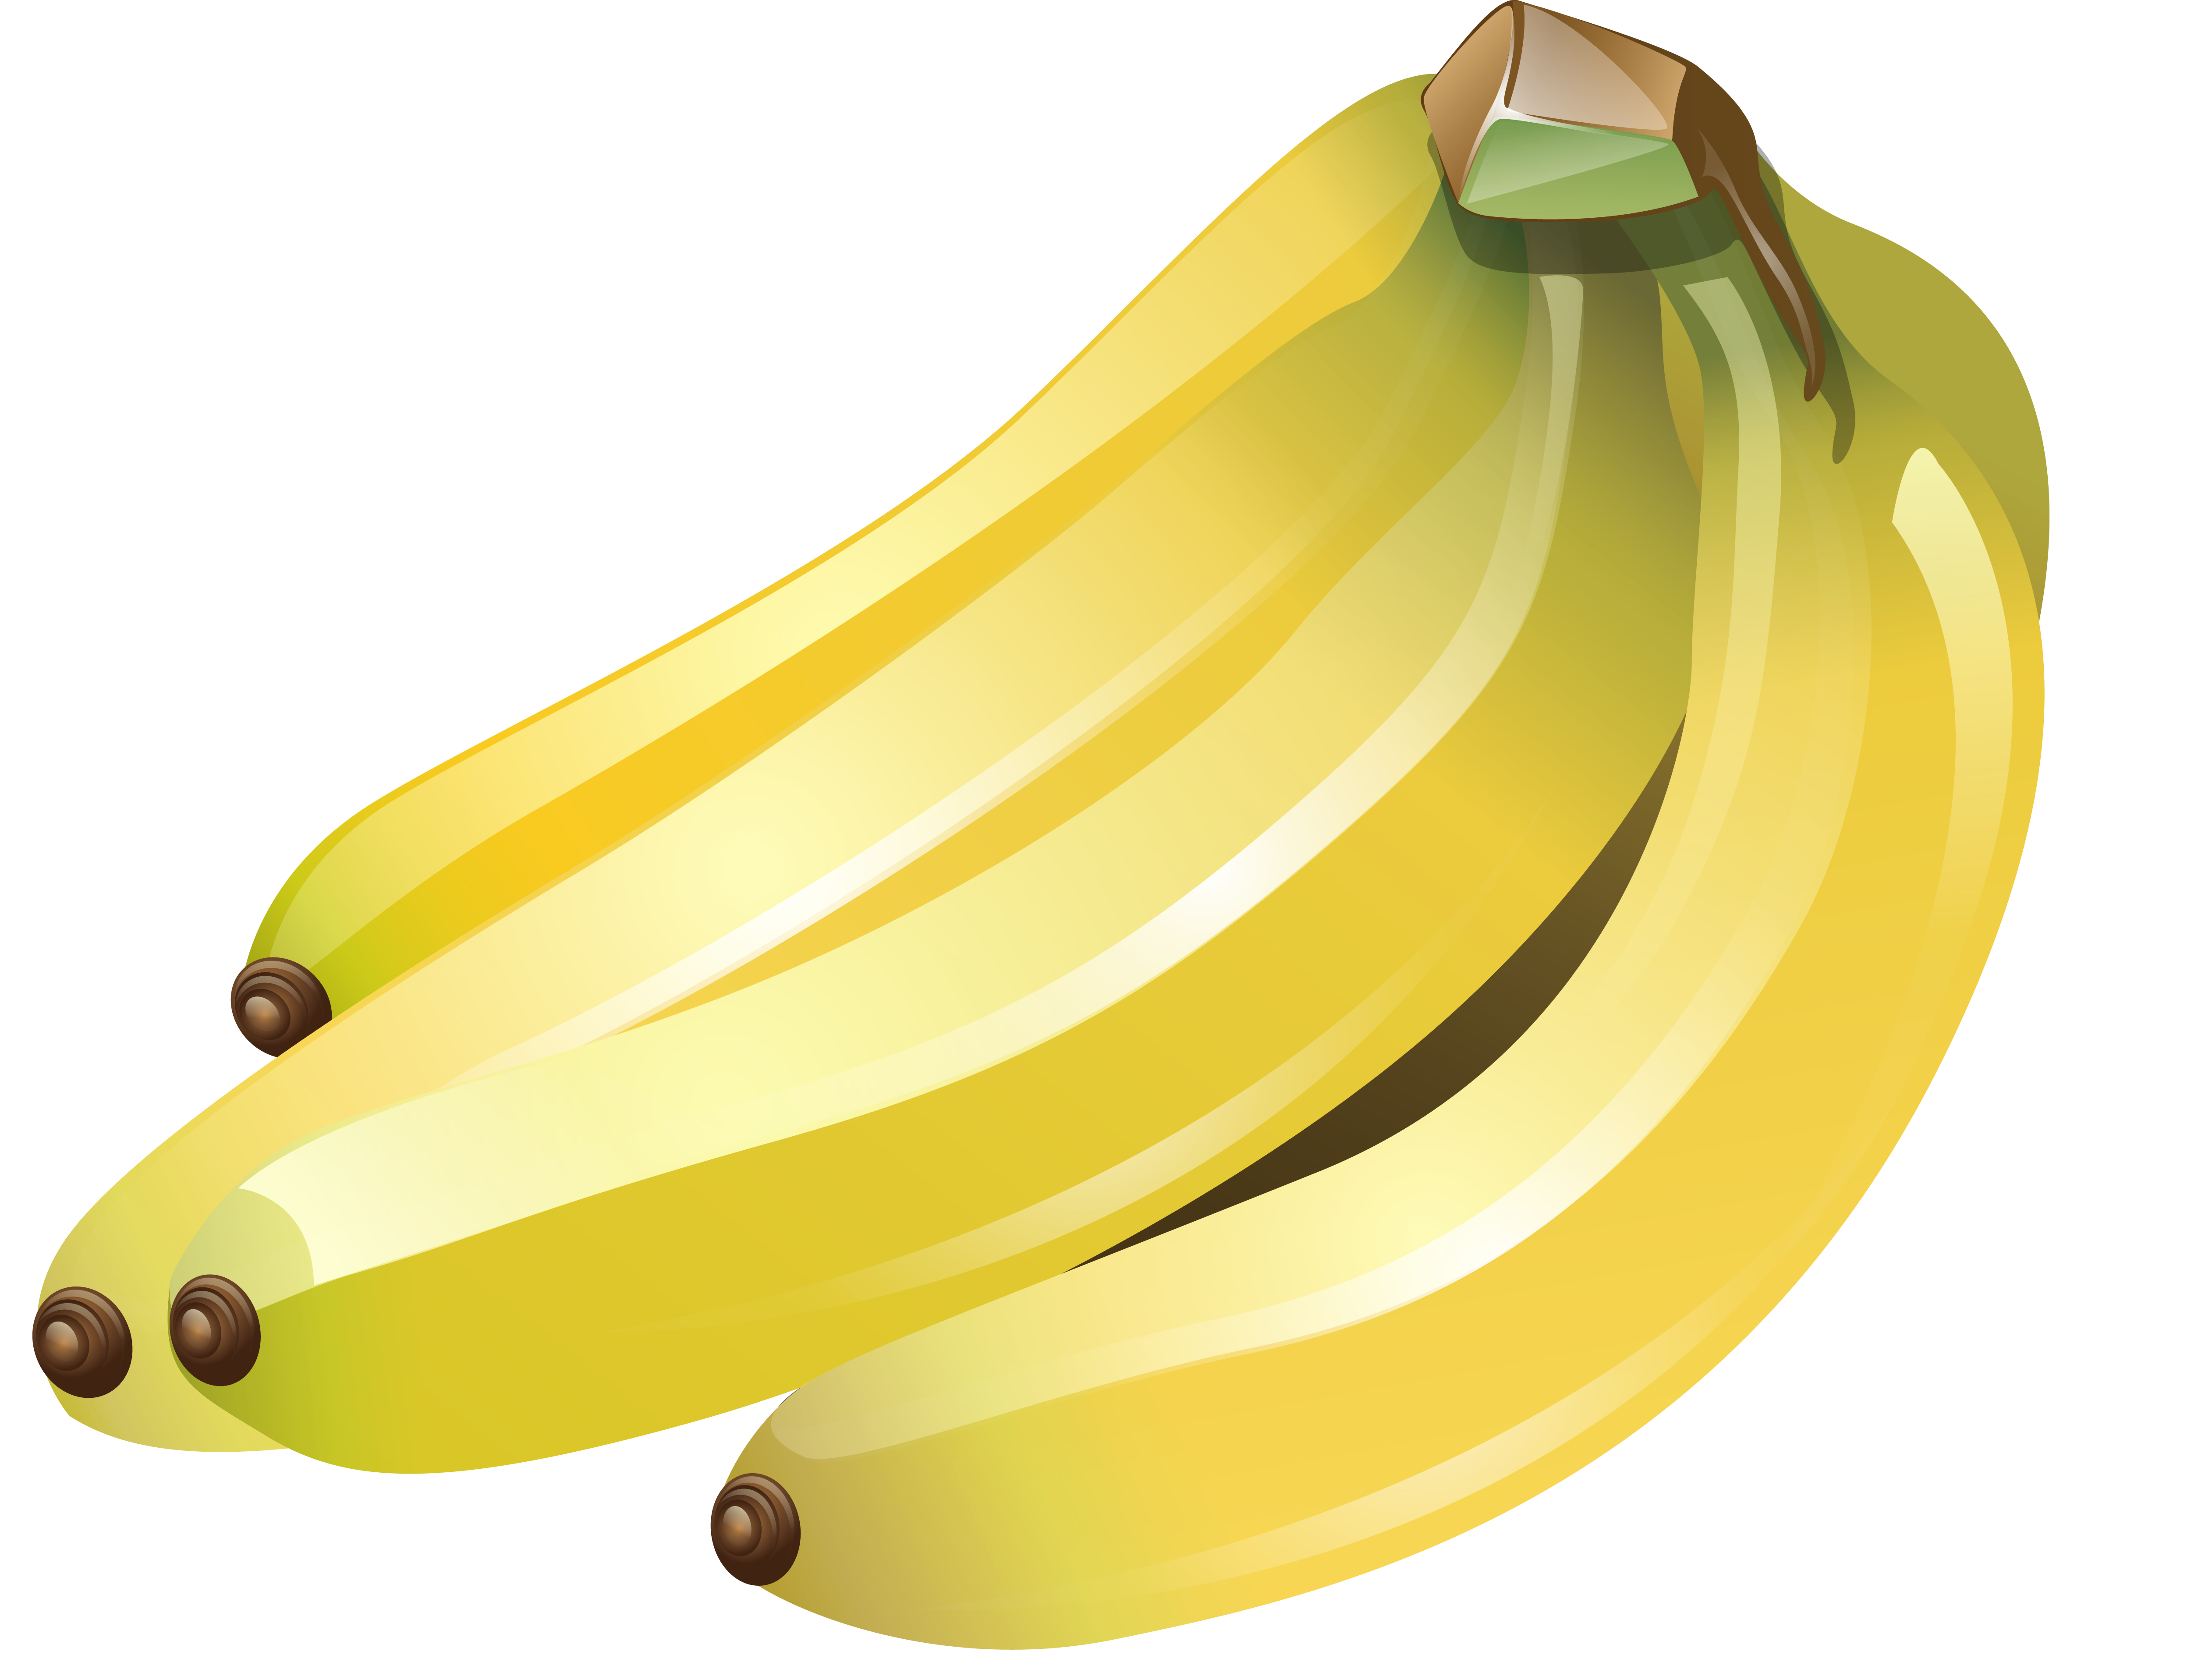 Download Peeled Banana Transparent PNG on YELLOW Images